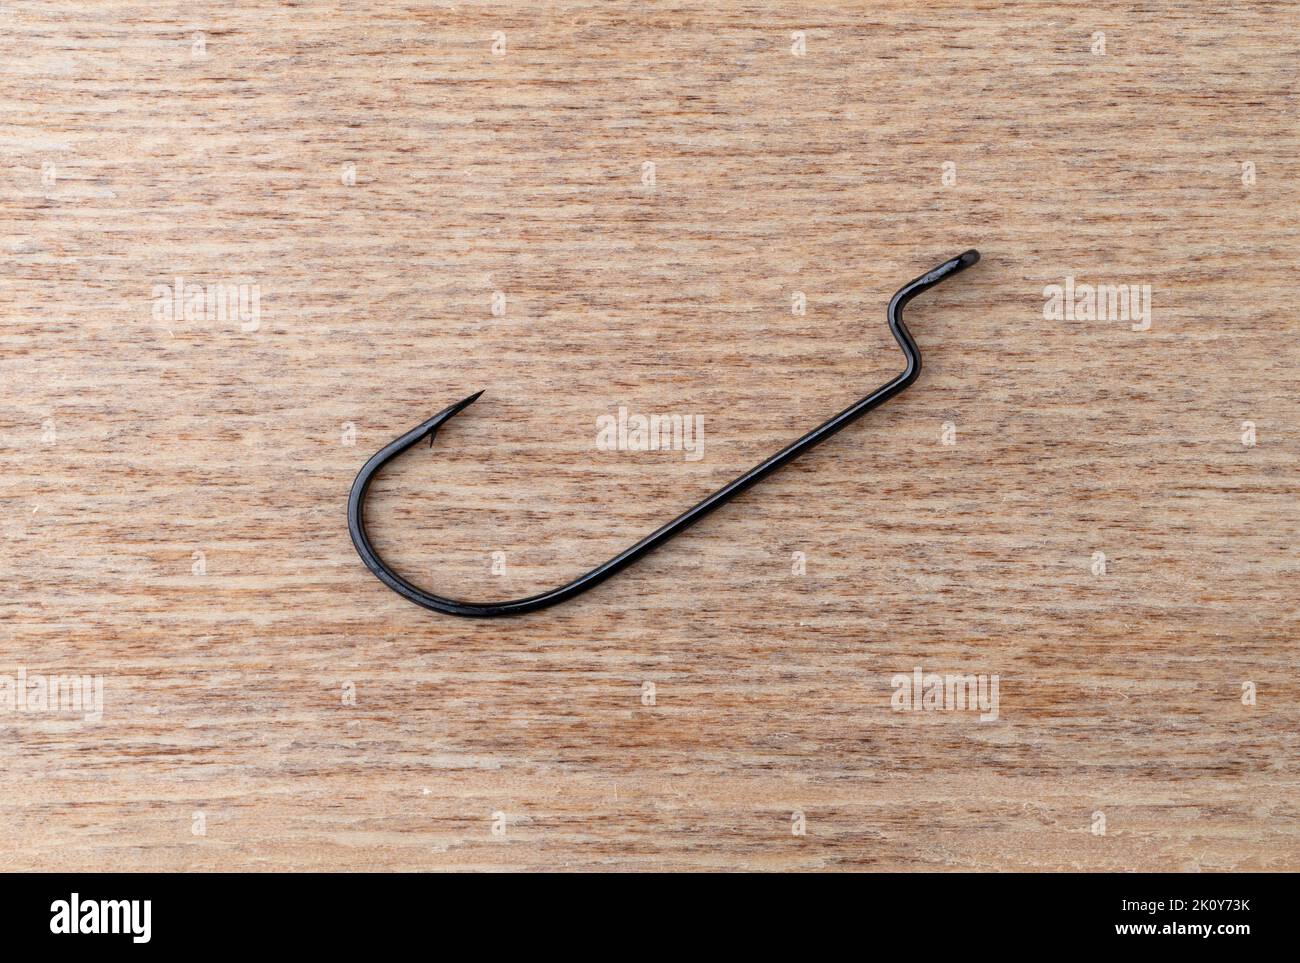 Top view of a single offset plastic worm bait hook on a wood background. Stock Photo